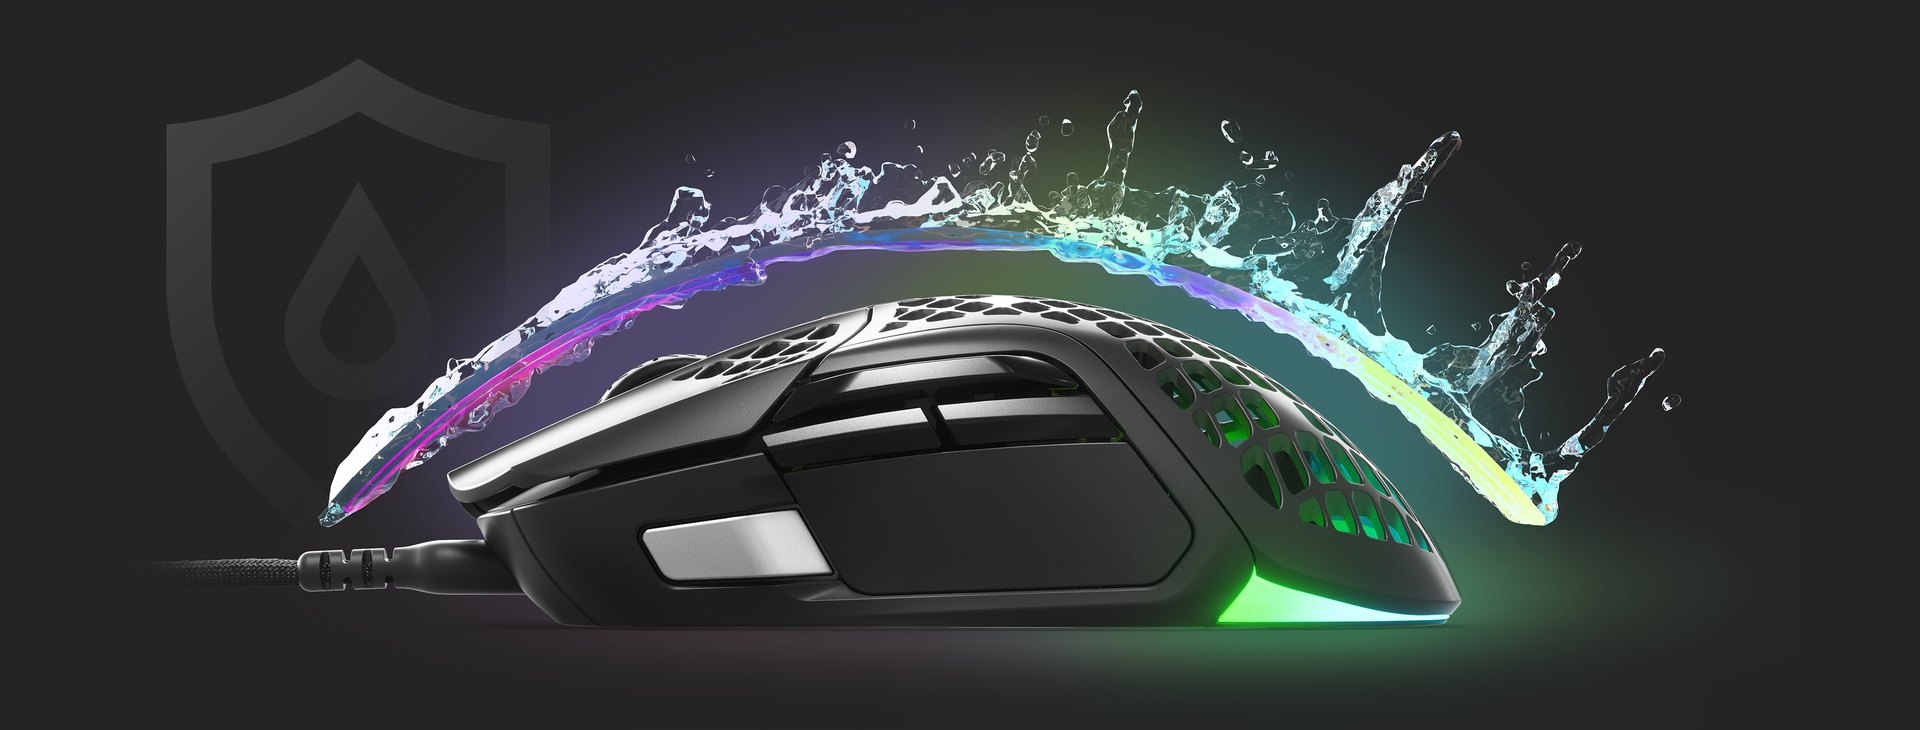 An Aerox 5 mouse with an invisible shield protecting it from incoming water splashing, to convey the waterproofing features.